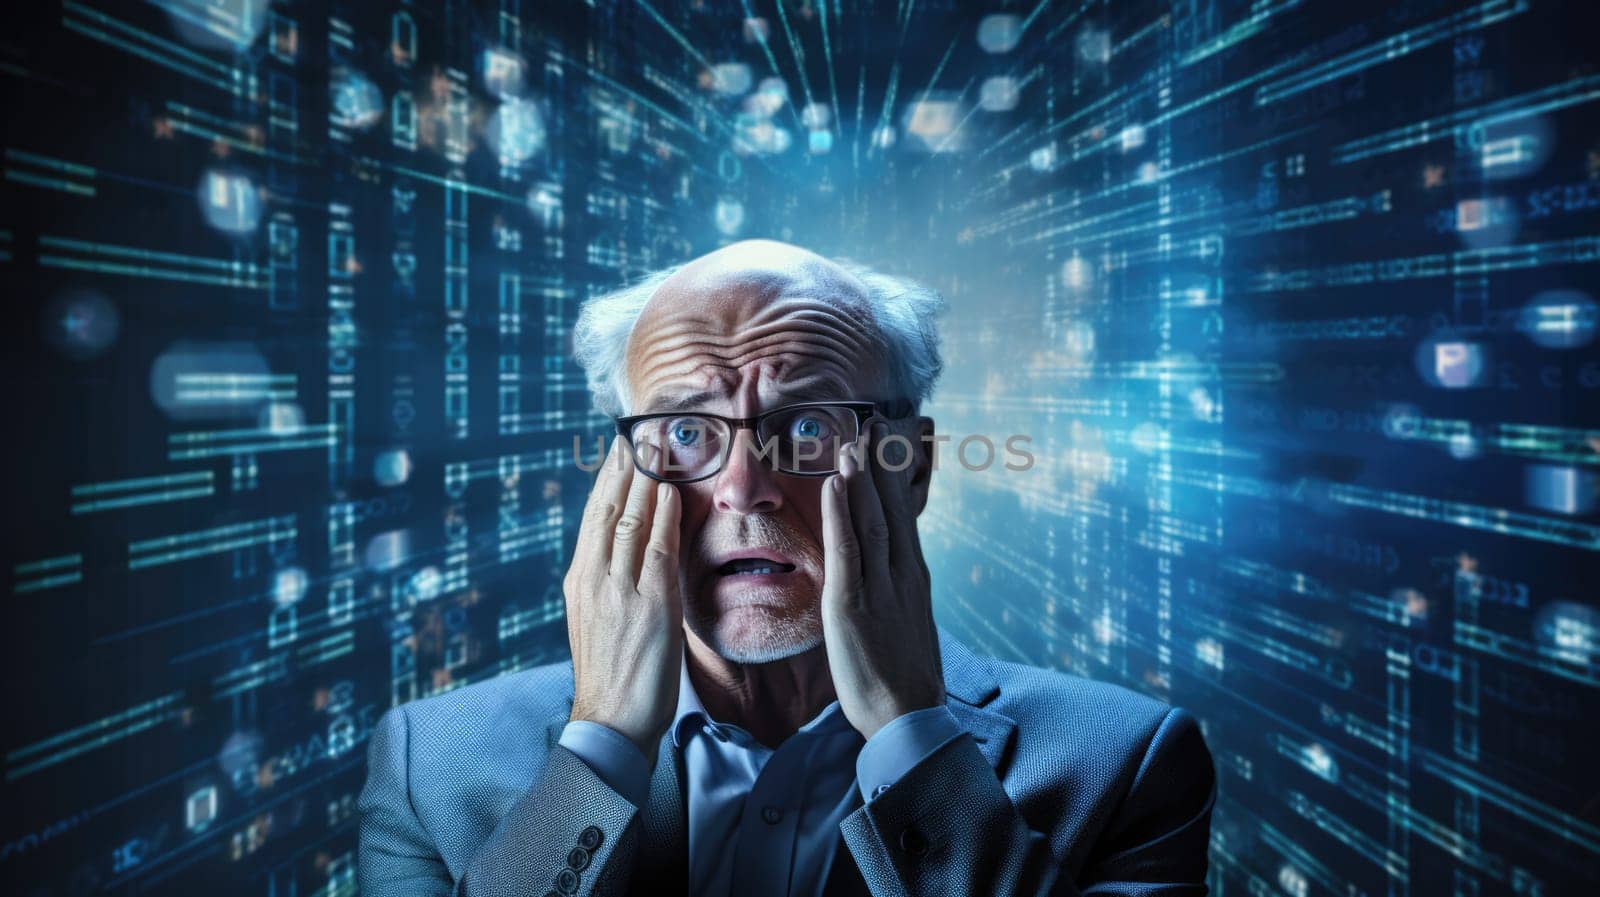 Business person overloaded by stress from business data and information that come from work, technology, social media and marketing business strategy received by a corporate employee